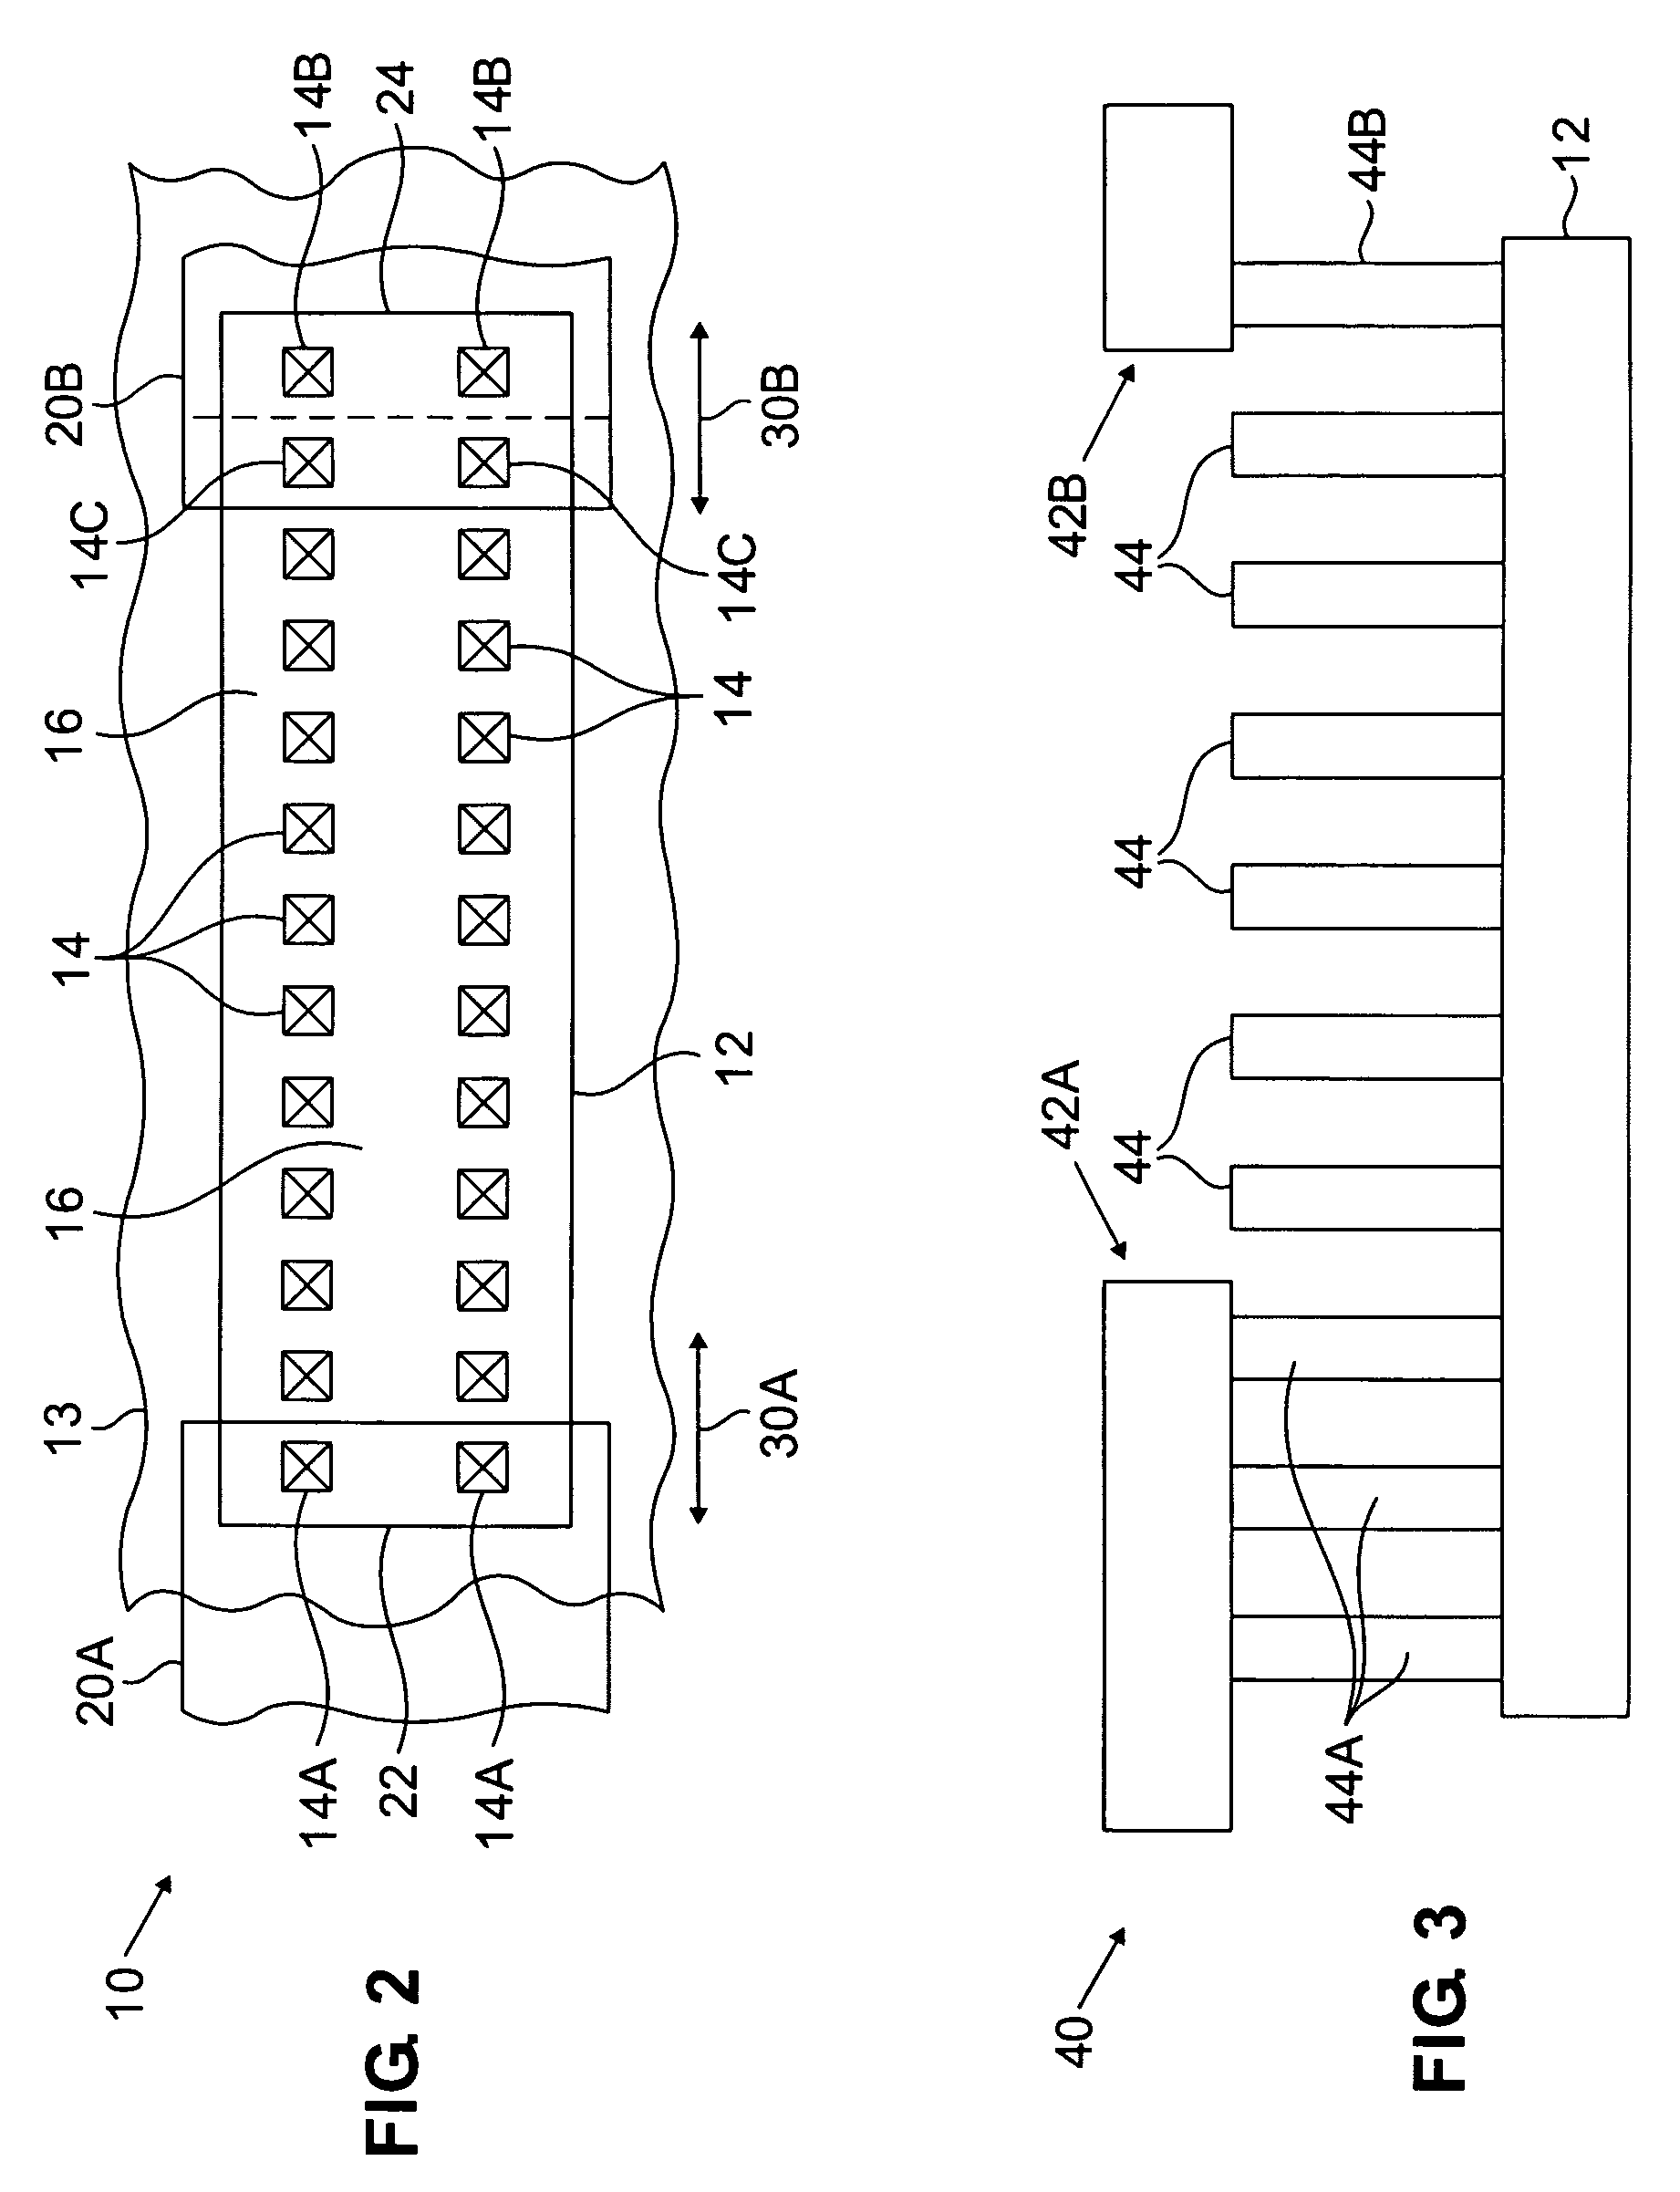 Structure and method for adjusting integrated circuit resistor value